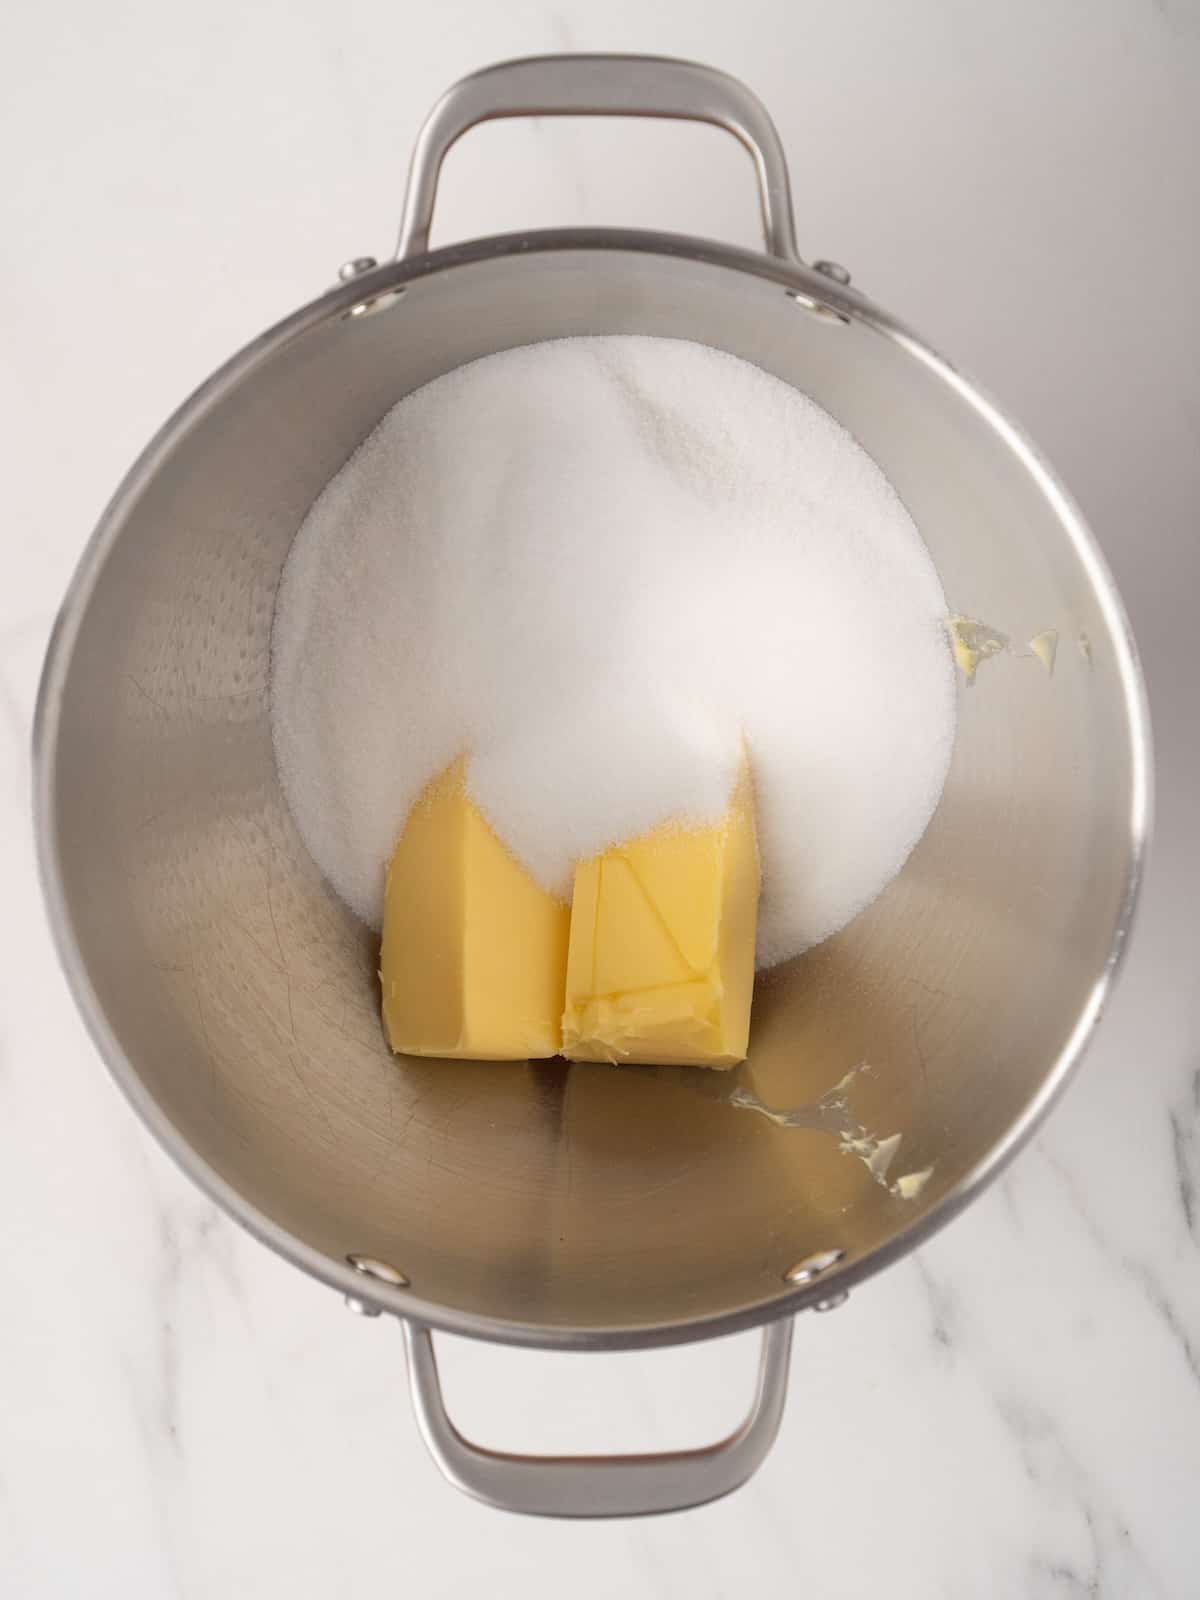 A stand mixer bowl with white sugar and room temperature butter, ready to be creamed together.